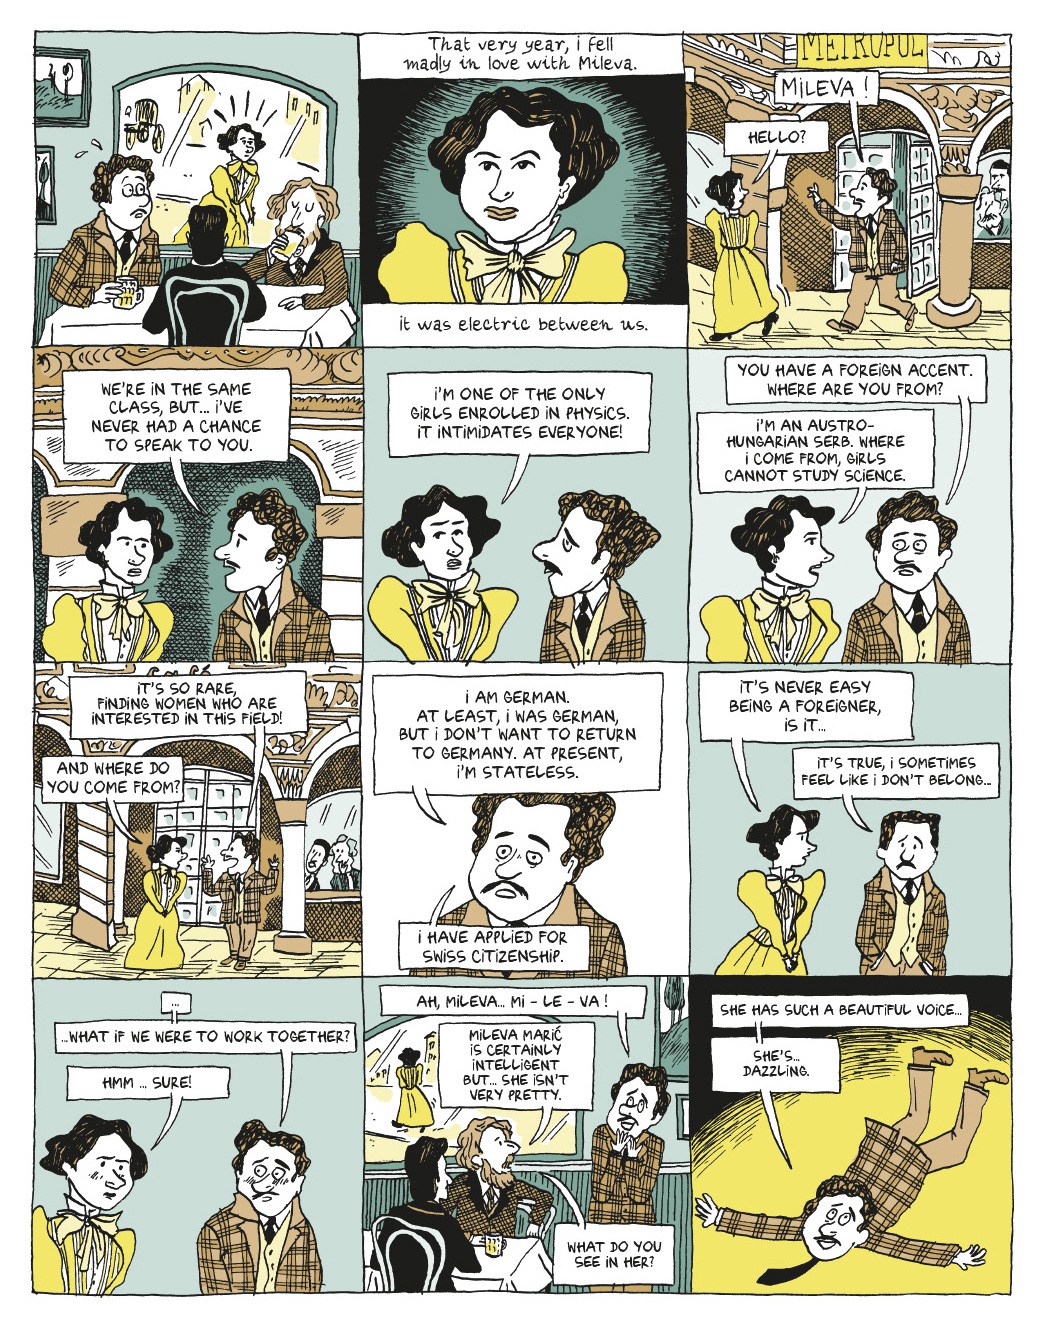 Einstein’s Brilliant and Unusual Life, in a Graphic Novel